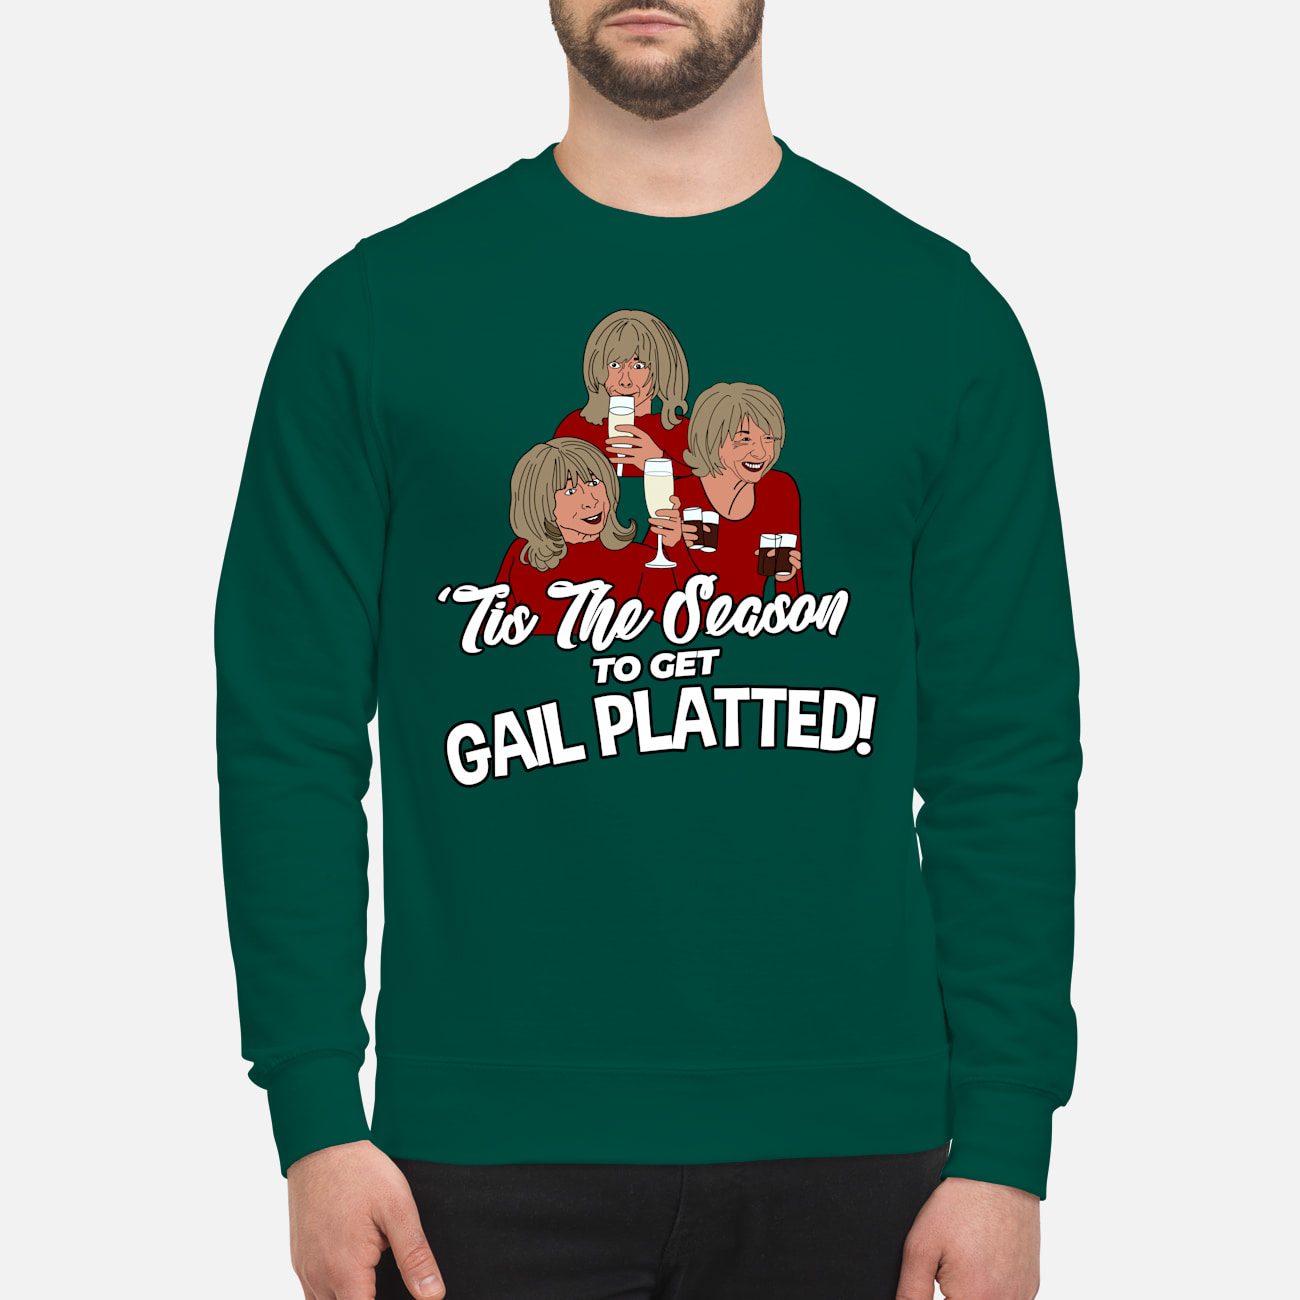 Hilarious range of Christmas jumpers that are perfect for Mancs has launched, The Manc